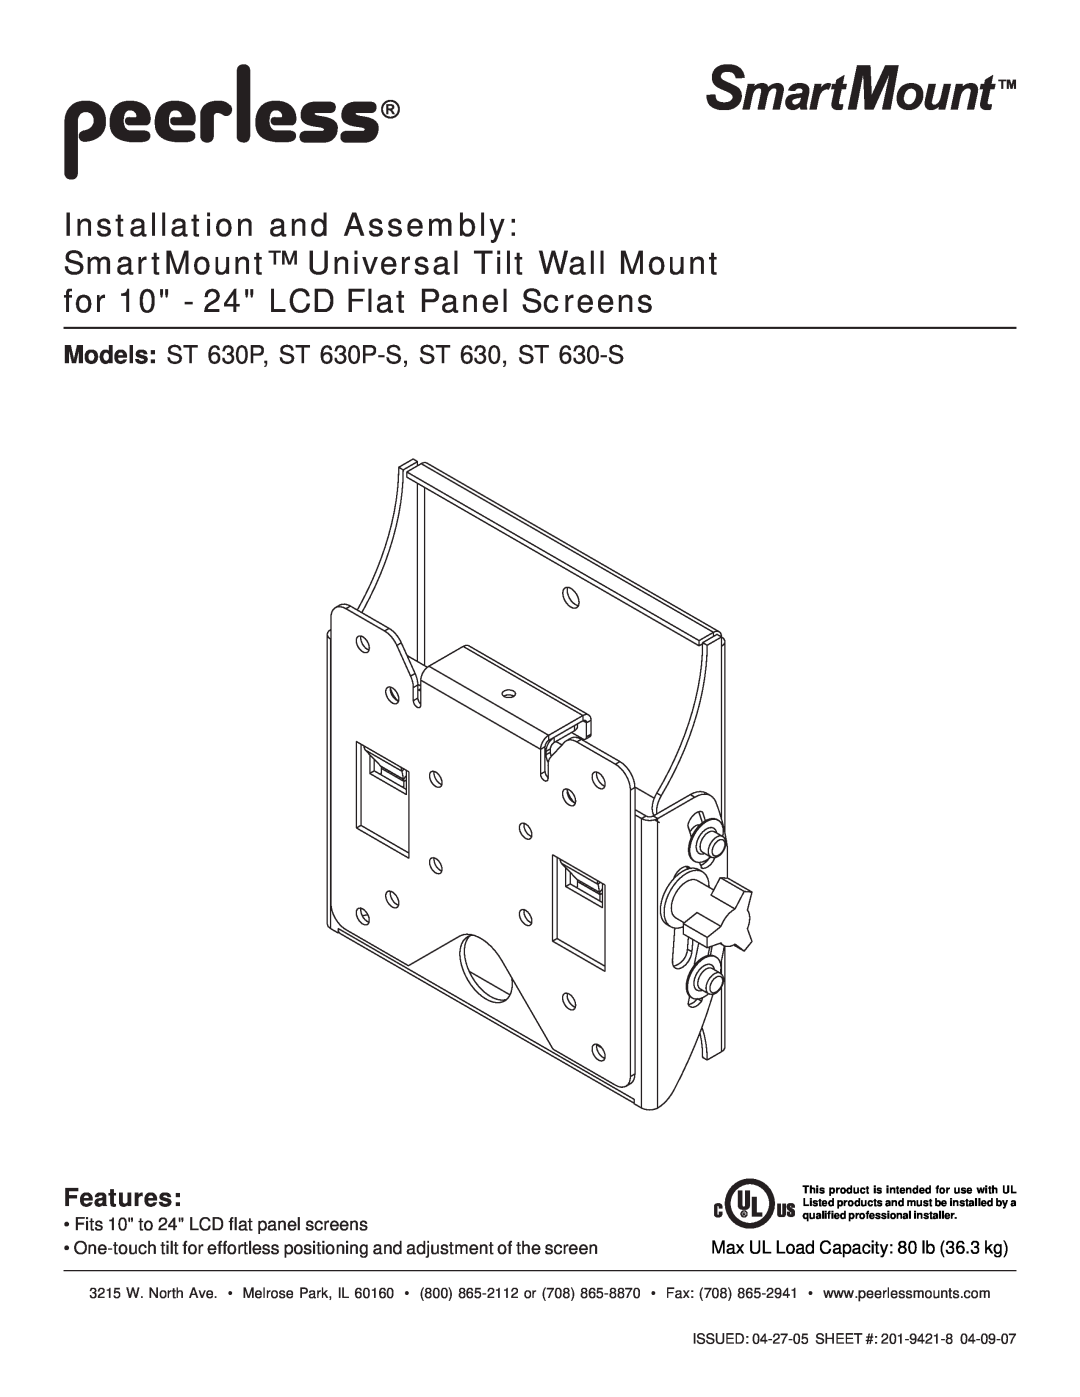 Peerless Industries manual Features, Models ST 630P, ST 630P-S, ST 630, ST 630-S, ISSUED 04-27-05 SHEET # 201-9421-8 